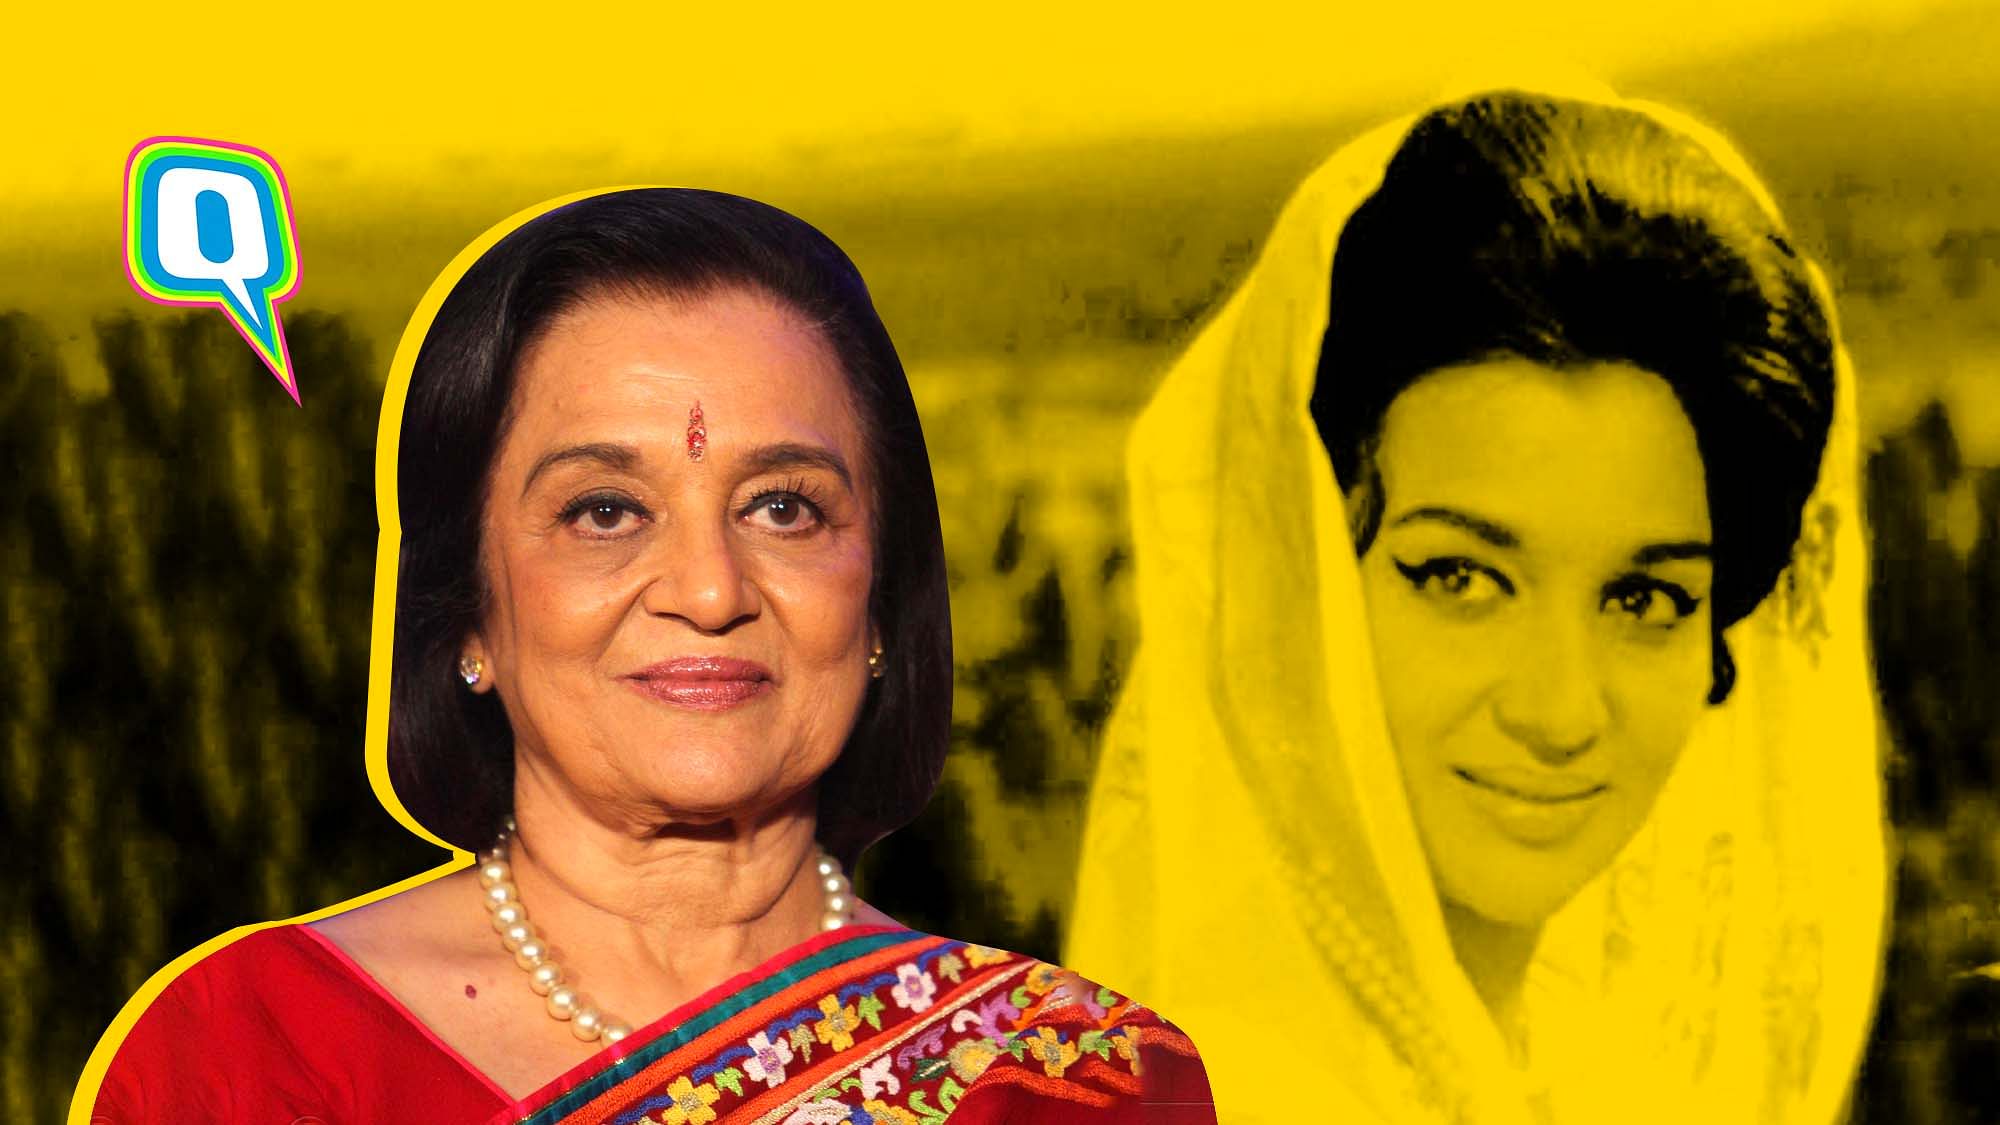 Millennials, take notes of Asha Parekh’s advice on love, life and relationships!&nbsp;